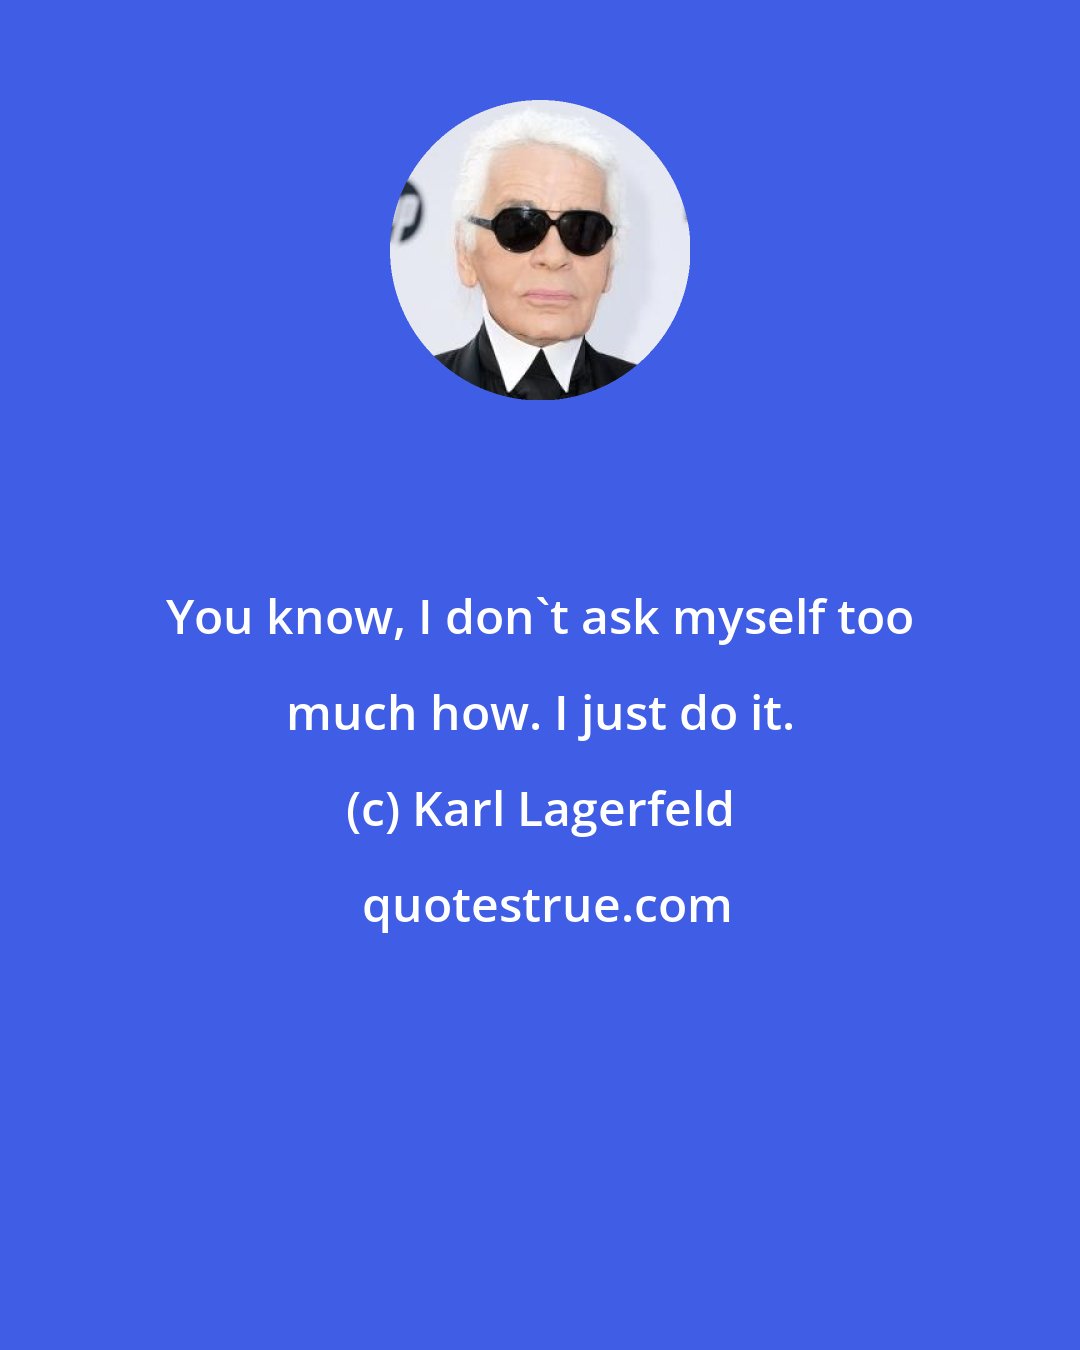 Karl Lagerfeld: You know, I don't ask myself too much how. I just do it.